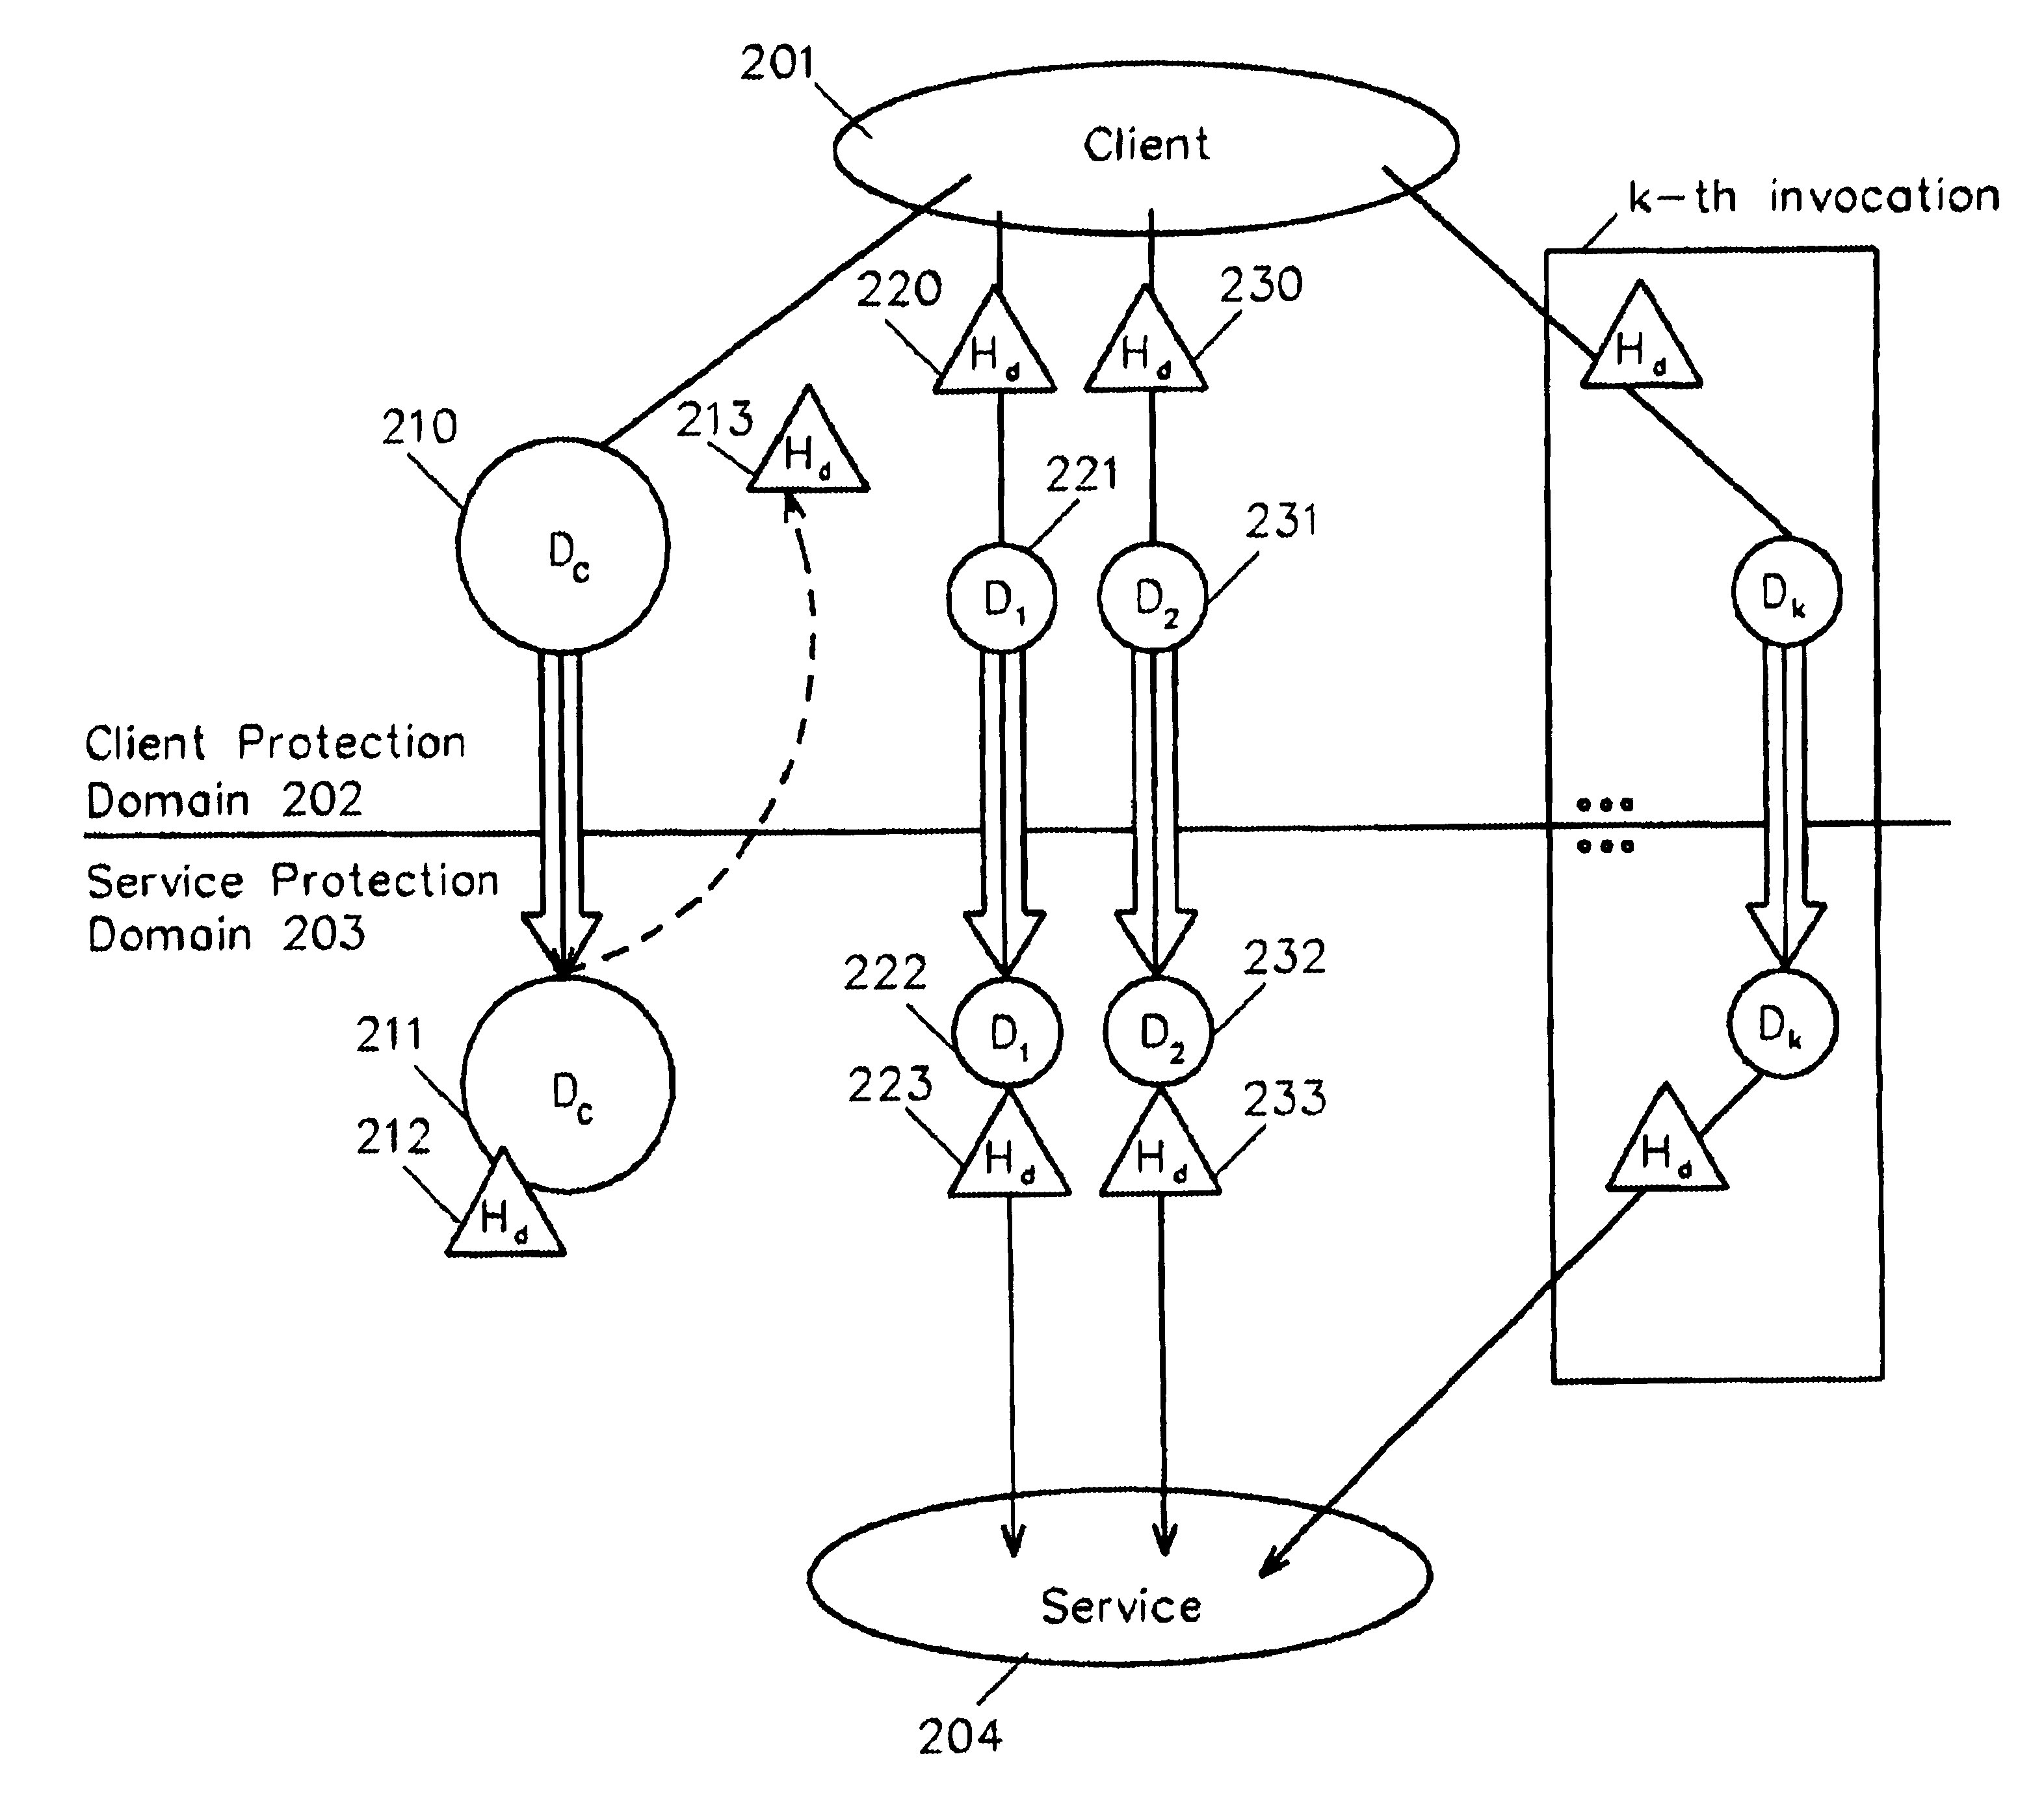 Method and system for cross-domain service invocation using a single data handle associated with the stored common data and invocation-specific data